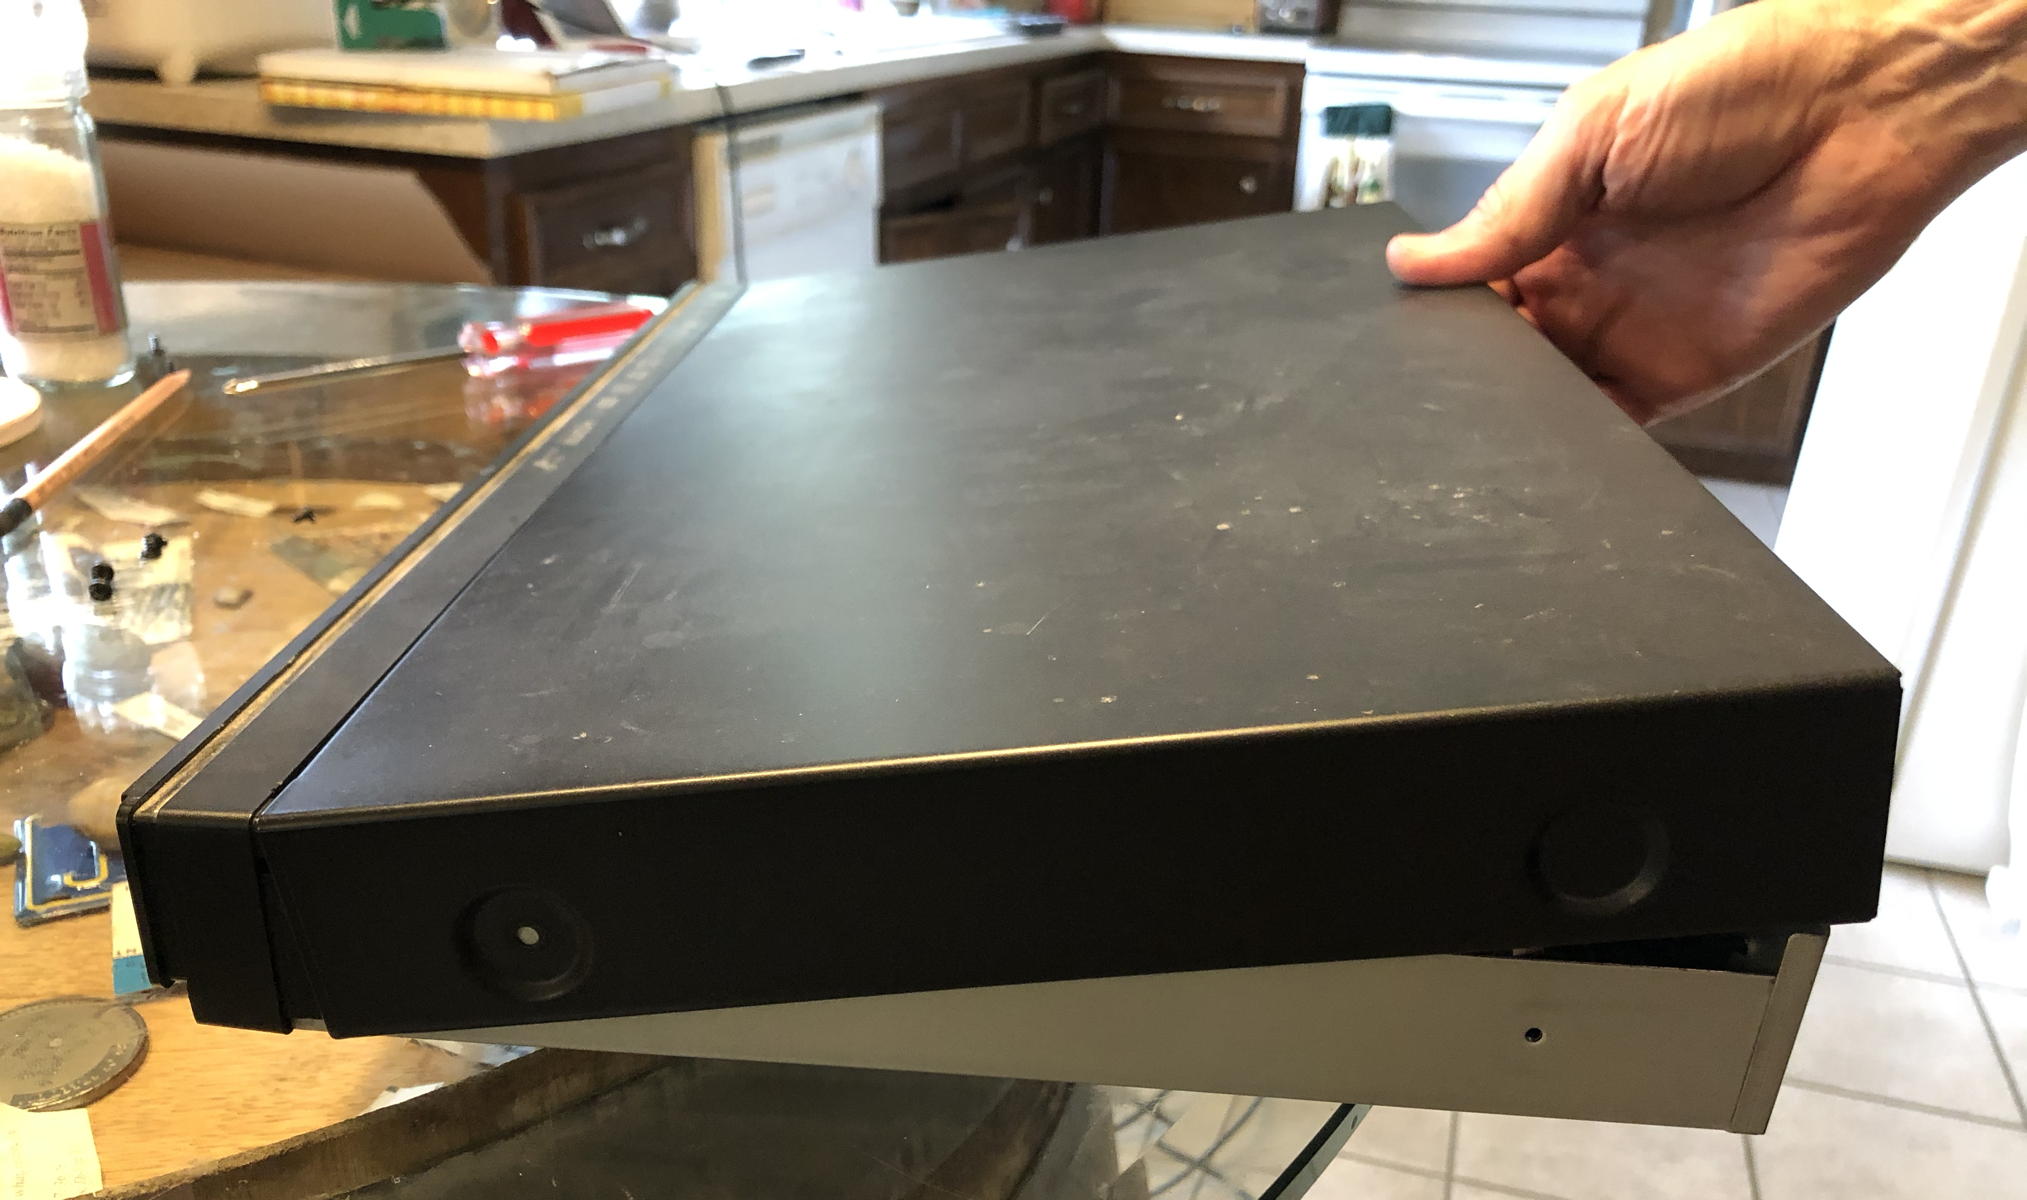 Oppo top cover removal: How to remove the top cover on an Oppo DVD player.; OPPO DVD player